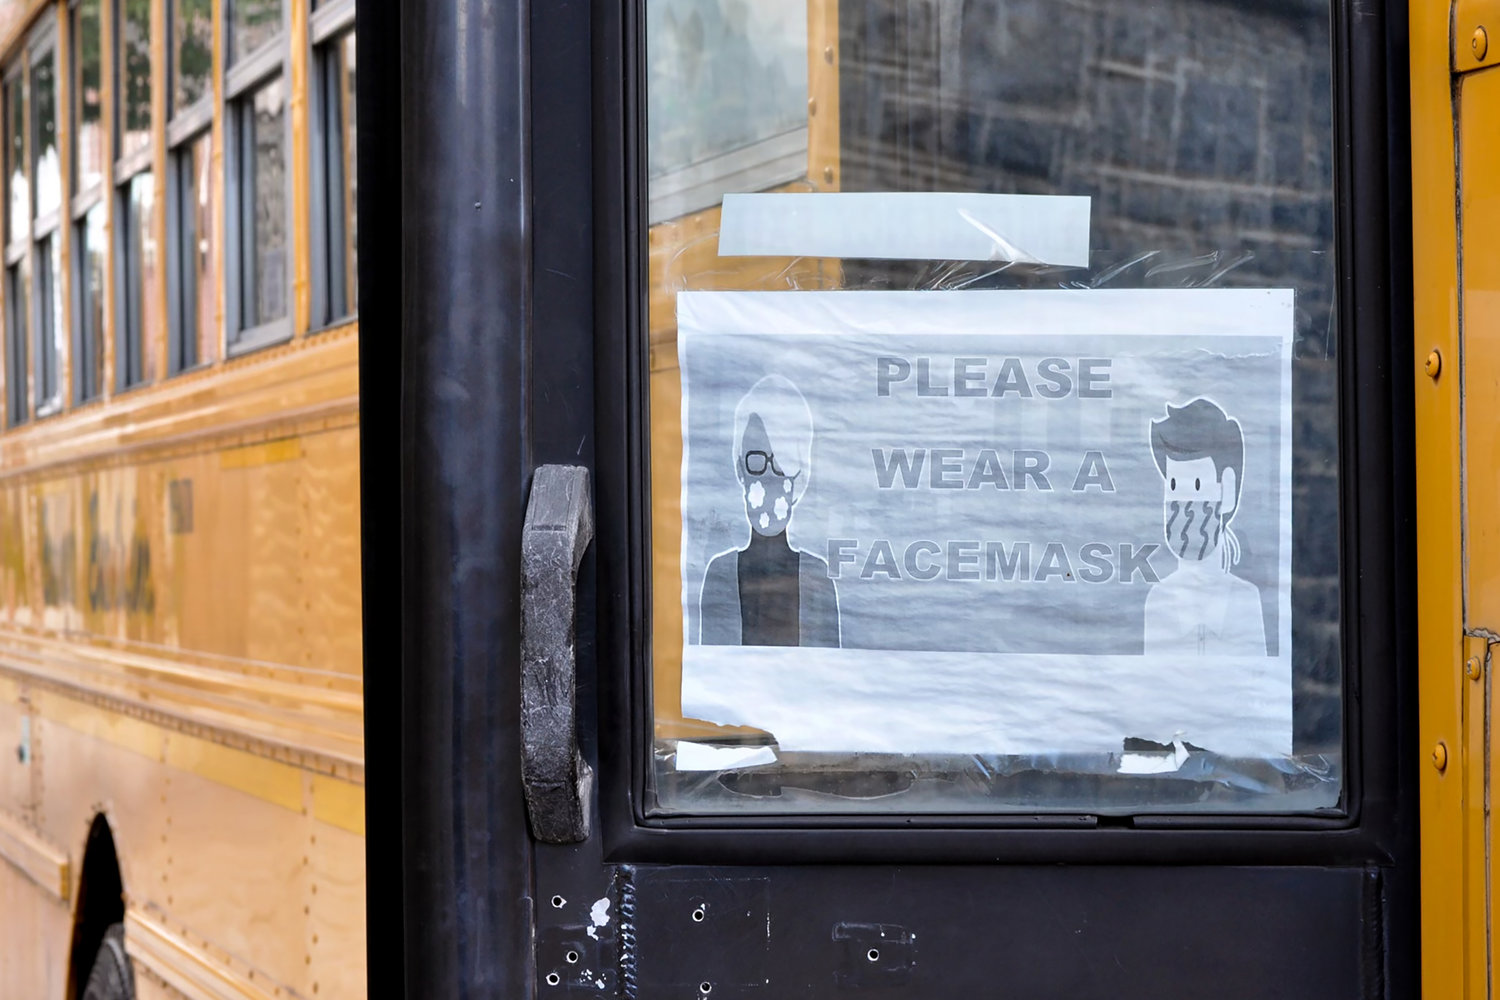 School buses may soon boast signs demanding passengers be vaccinated for the coronavirus posted right above signs encouraging them to wear face masks.